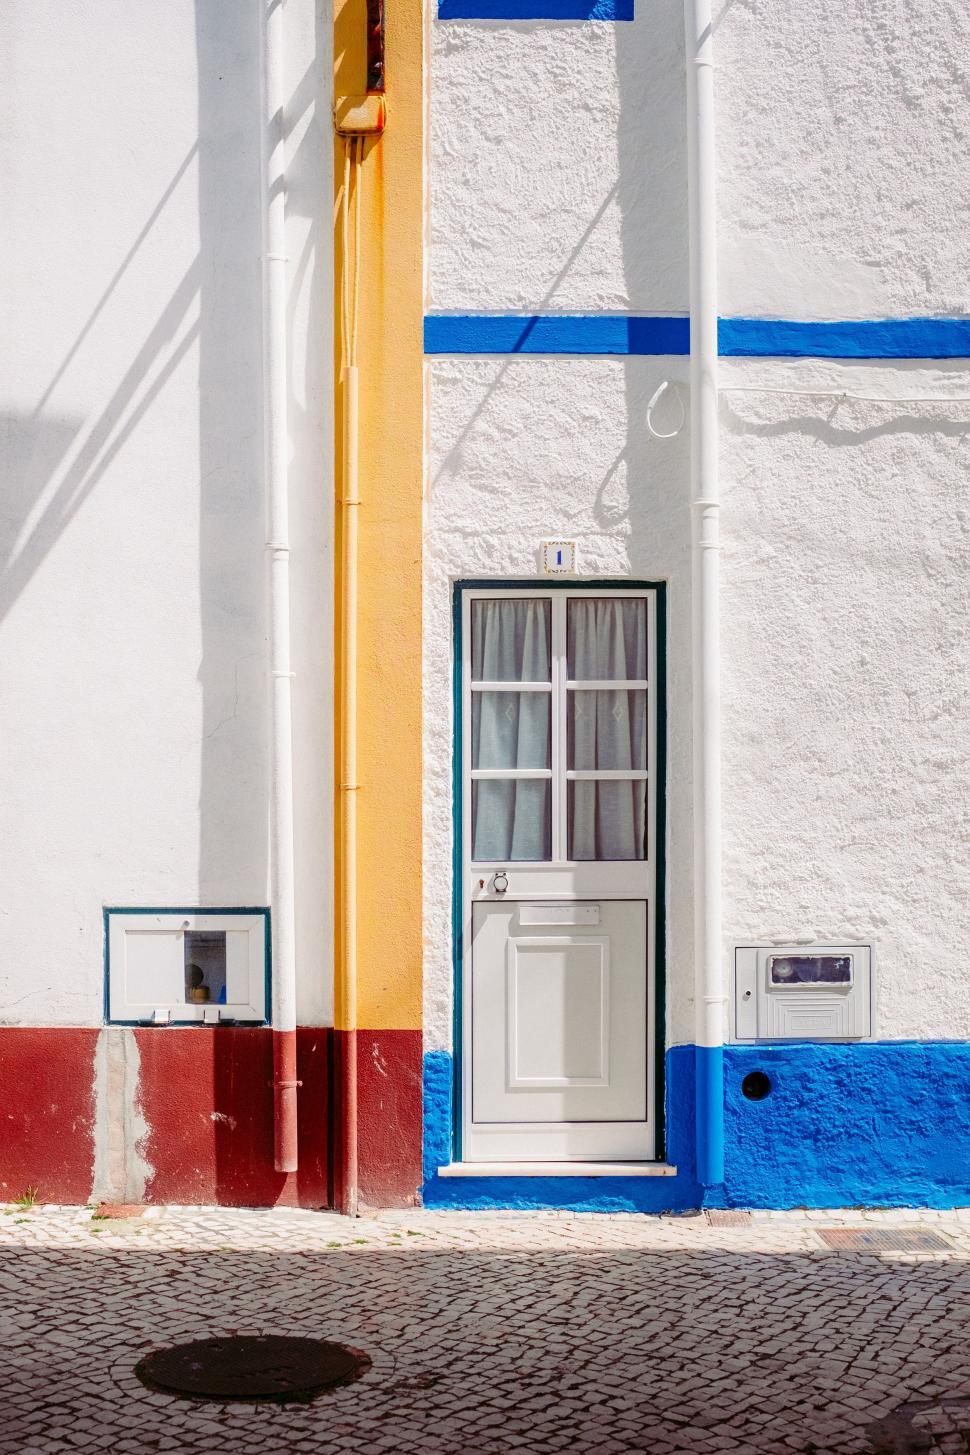 Free Image of White and Blue Building With Door and Window 